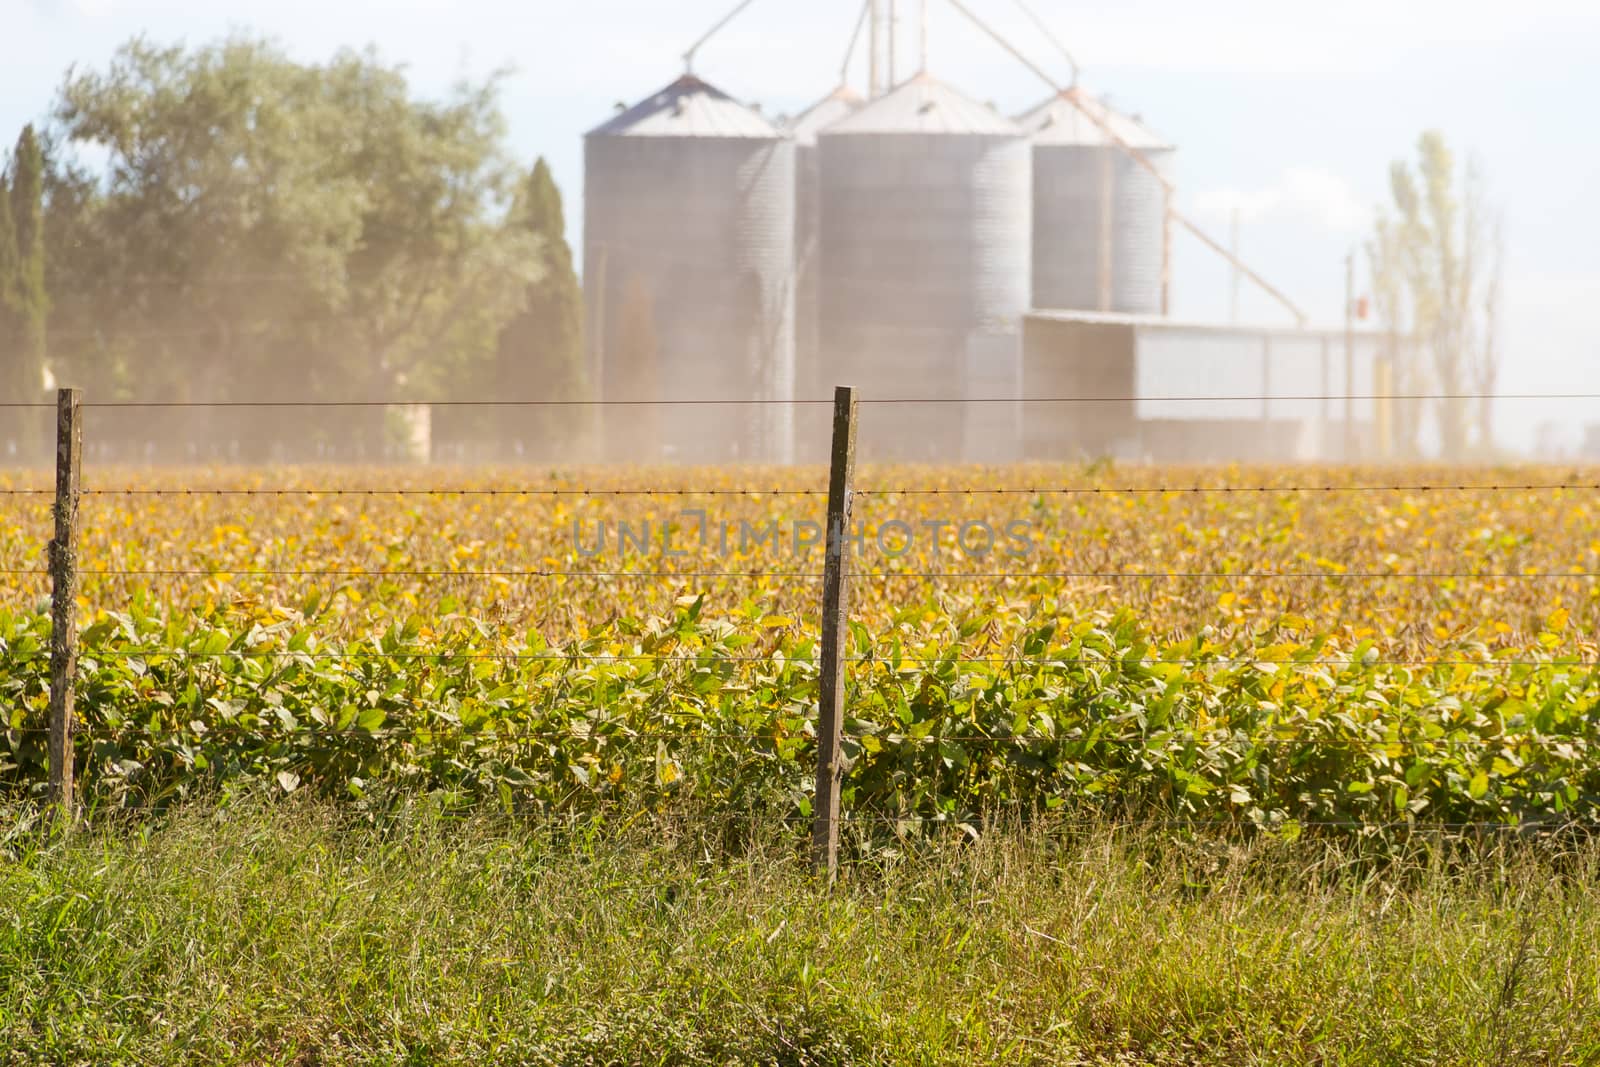 Soybean plantation in the field with defocused silos in the background